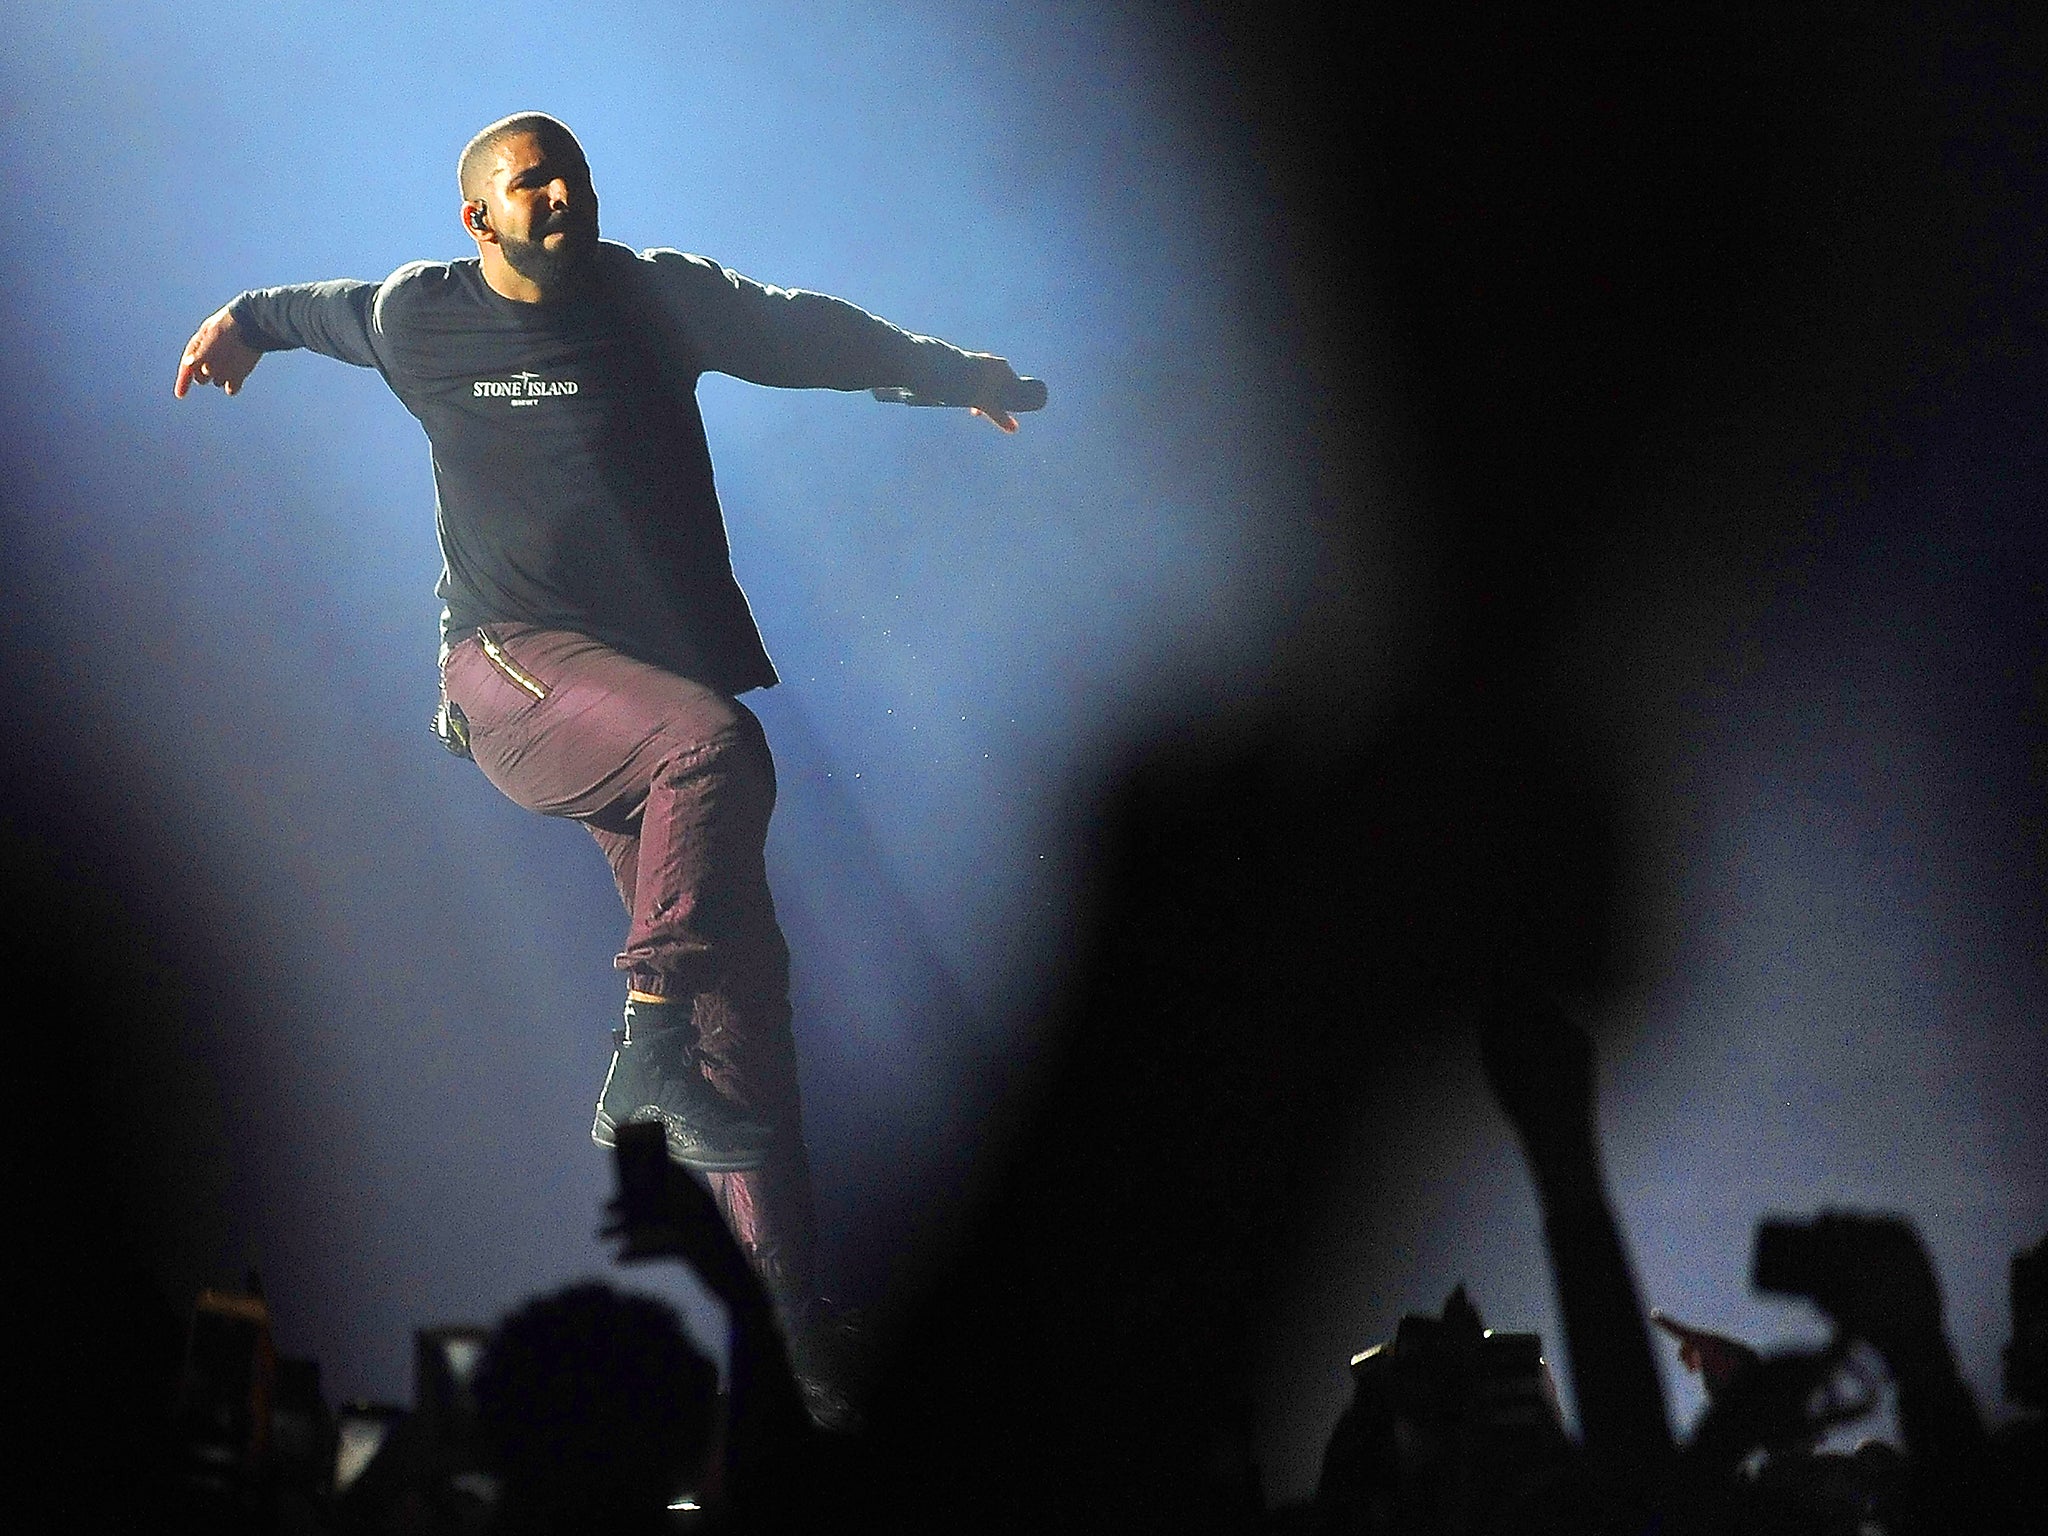 Drake performs live on stage at The O2 Arena in London